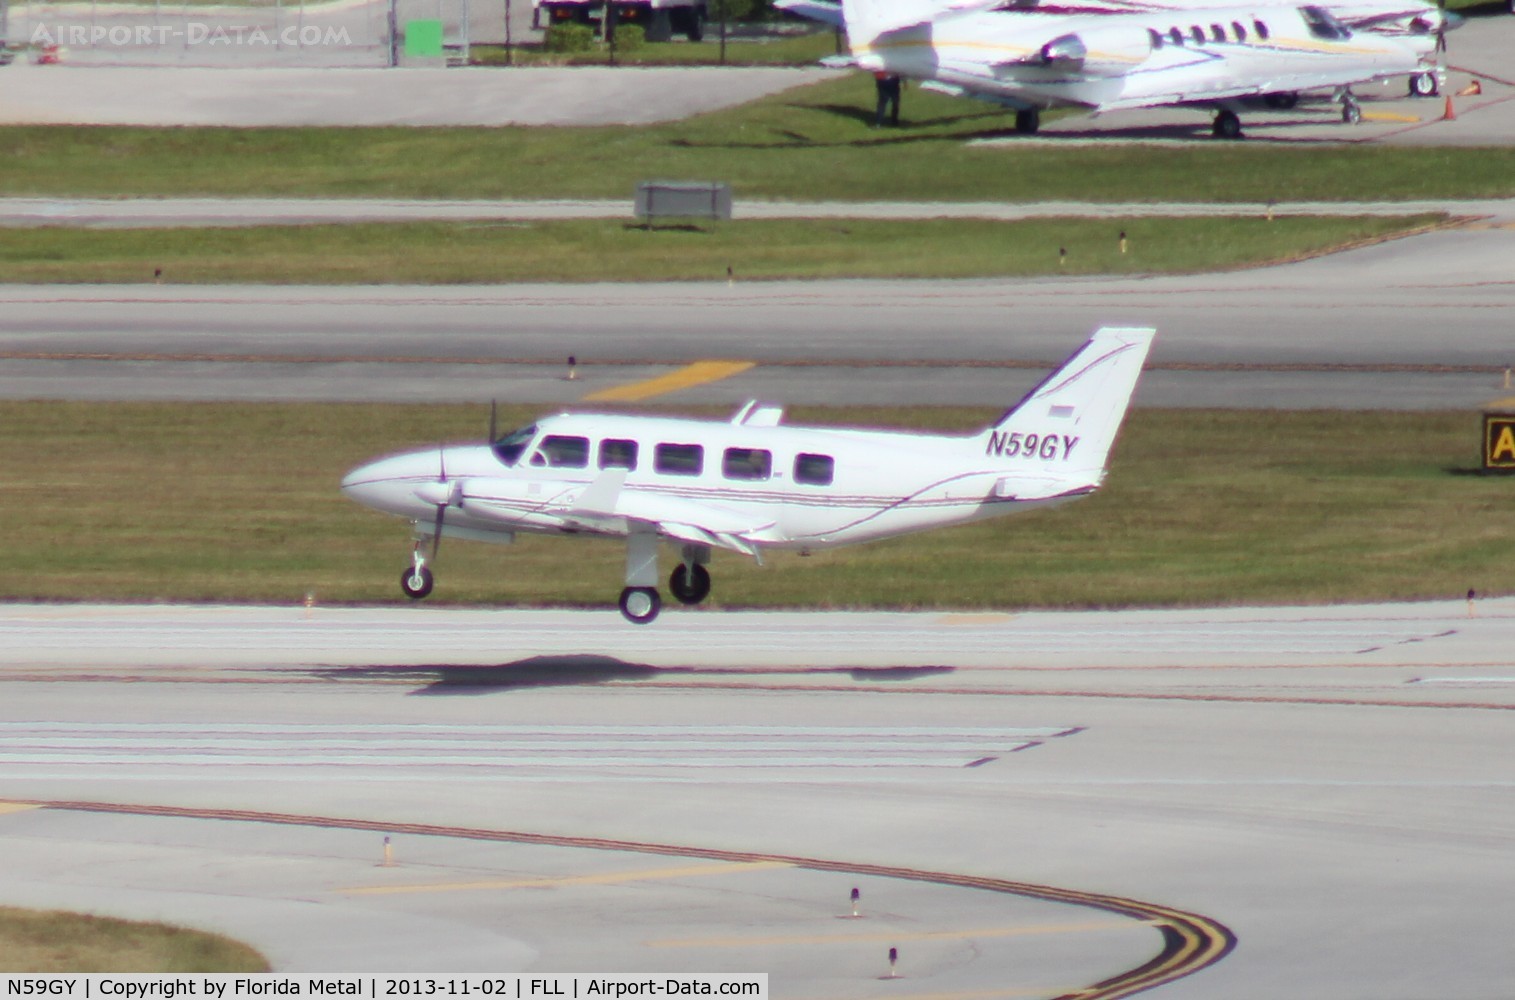 N59GY, 1977 Piper PA-31-350 Chieftain C/N 31-7852017, Piper PA-31-350